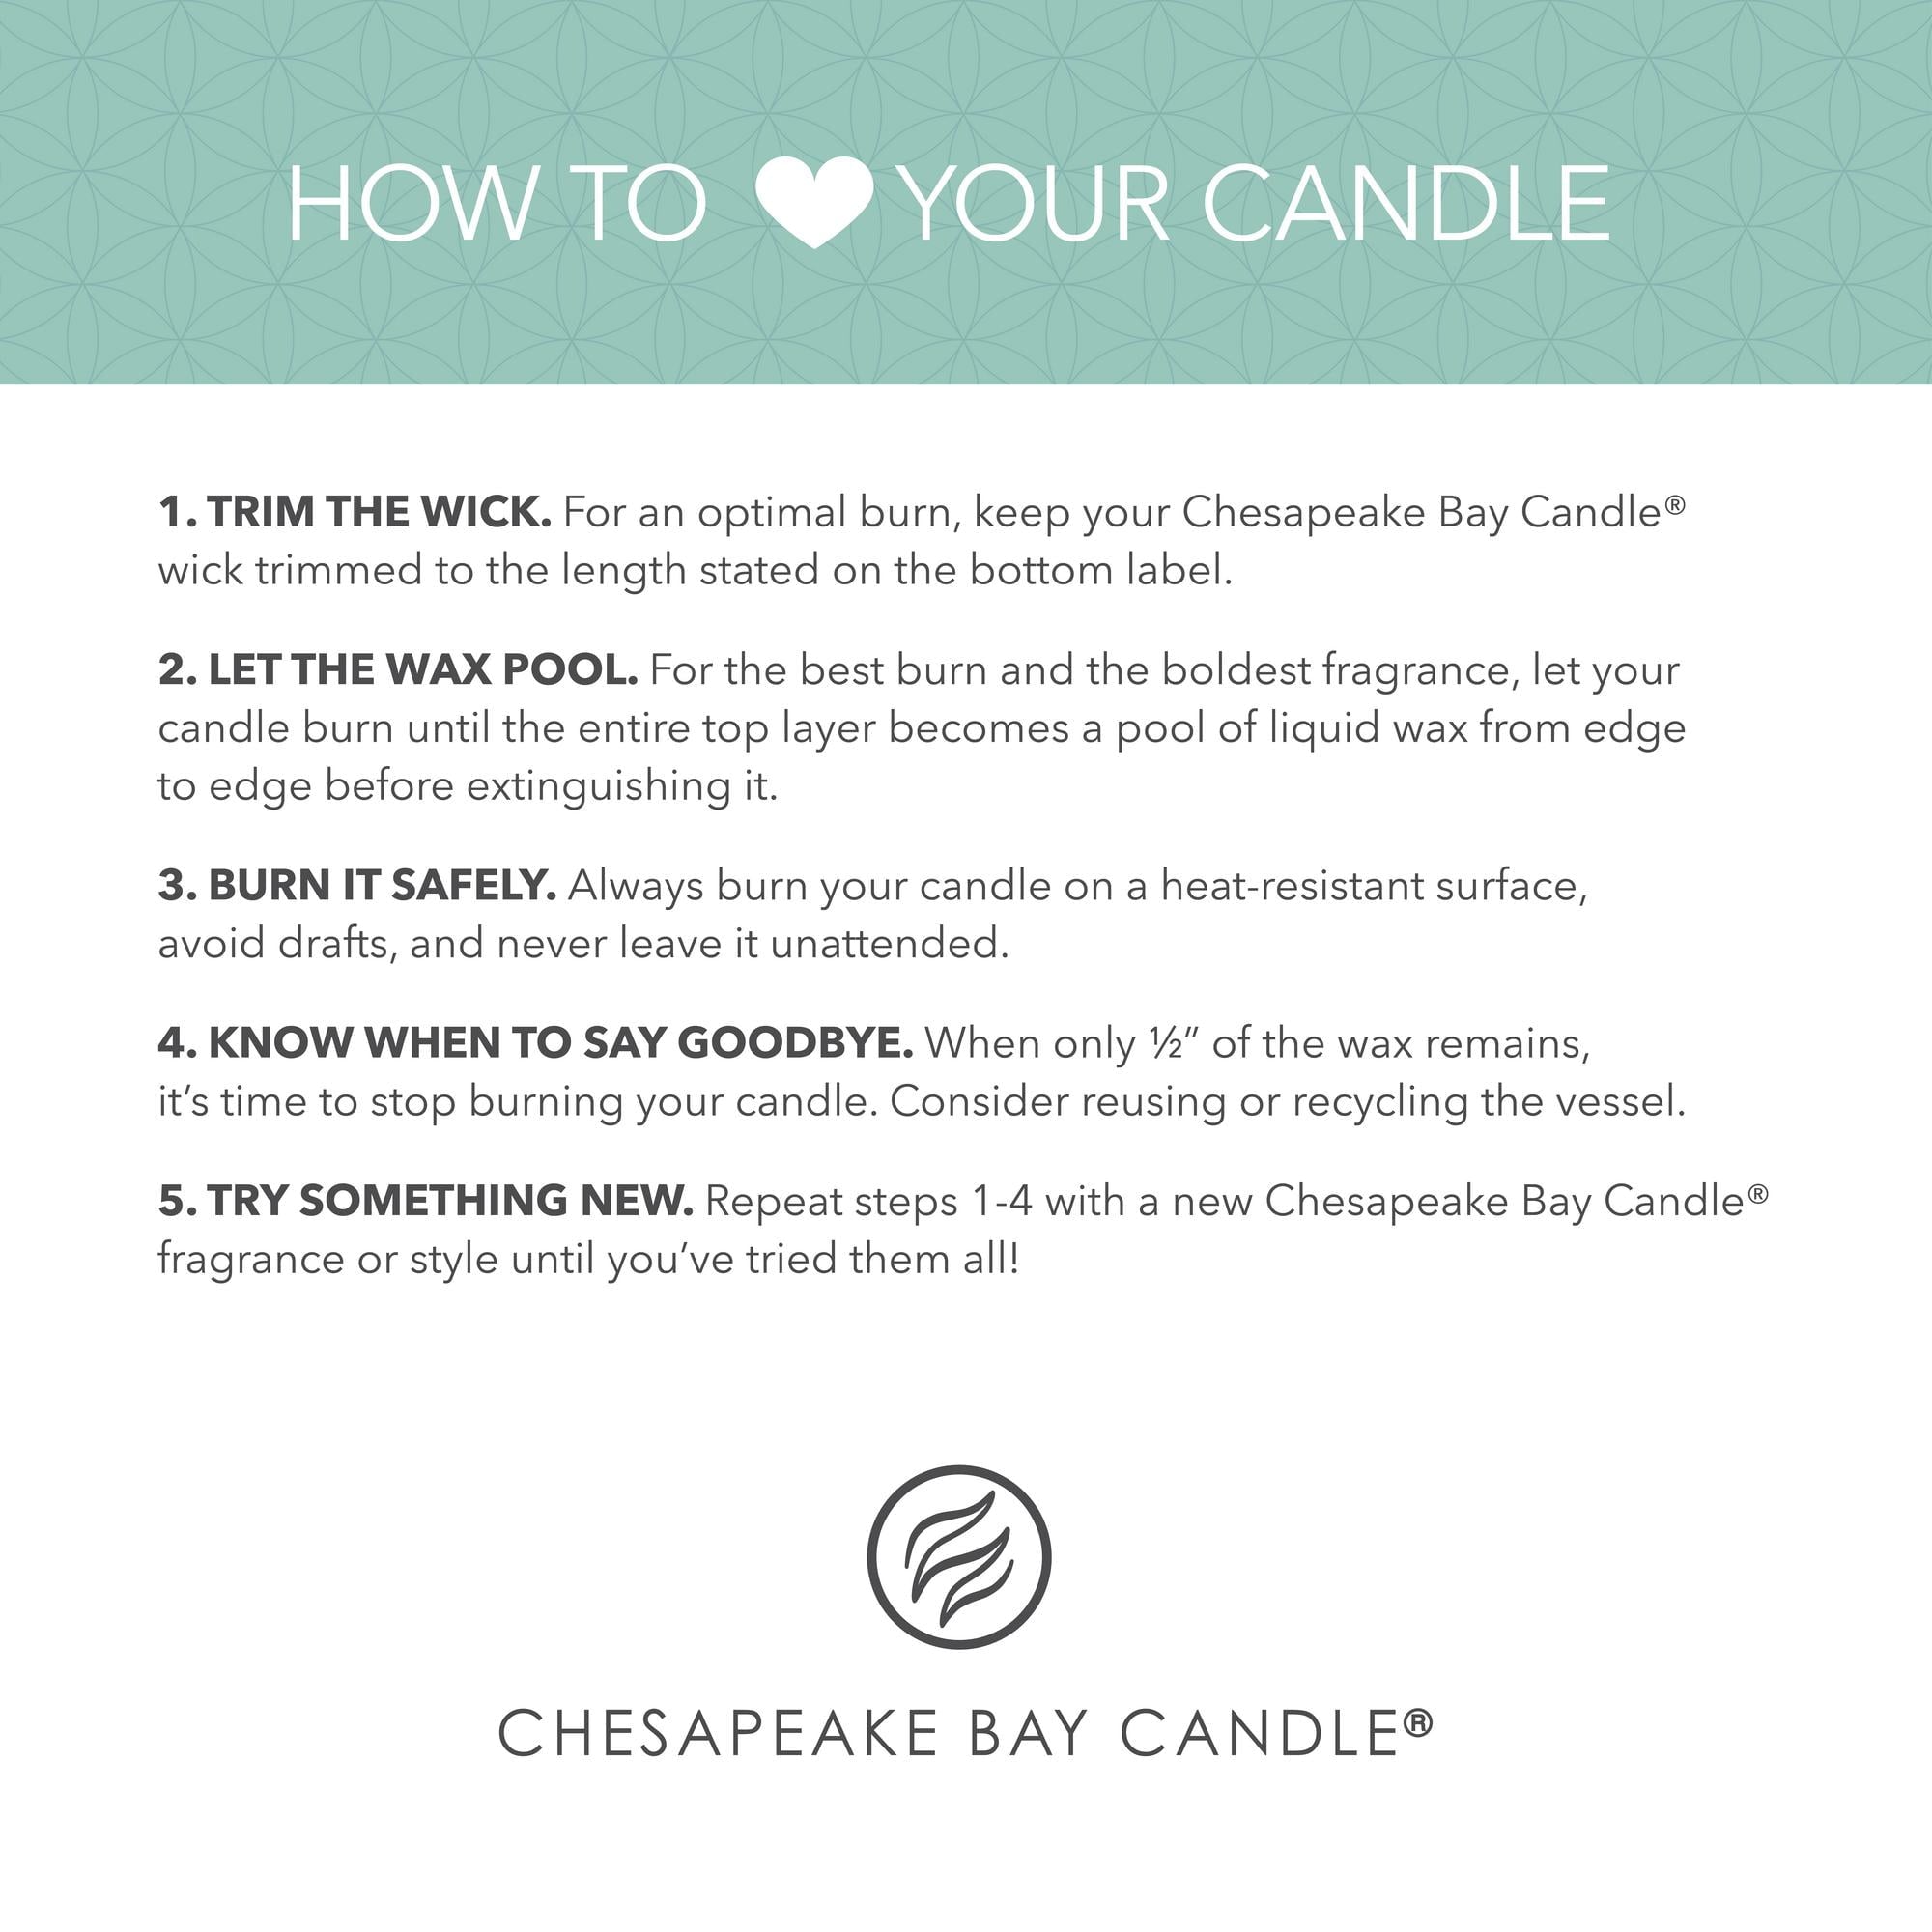 Chesapeake Bay 3 Wick 14.9oz Lavender Mint Candle, 4 Pack